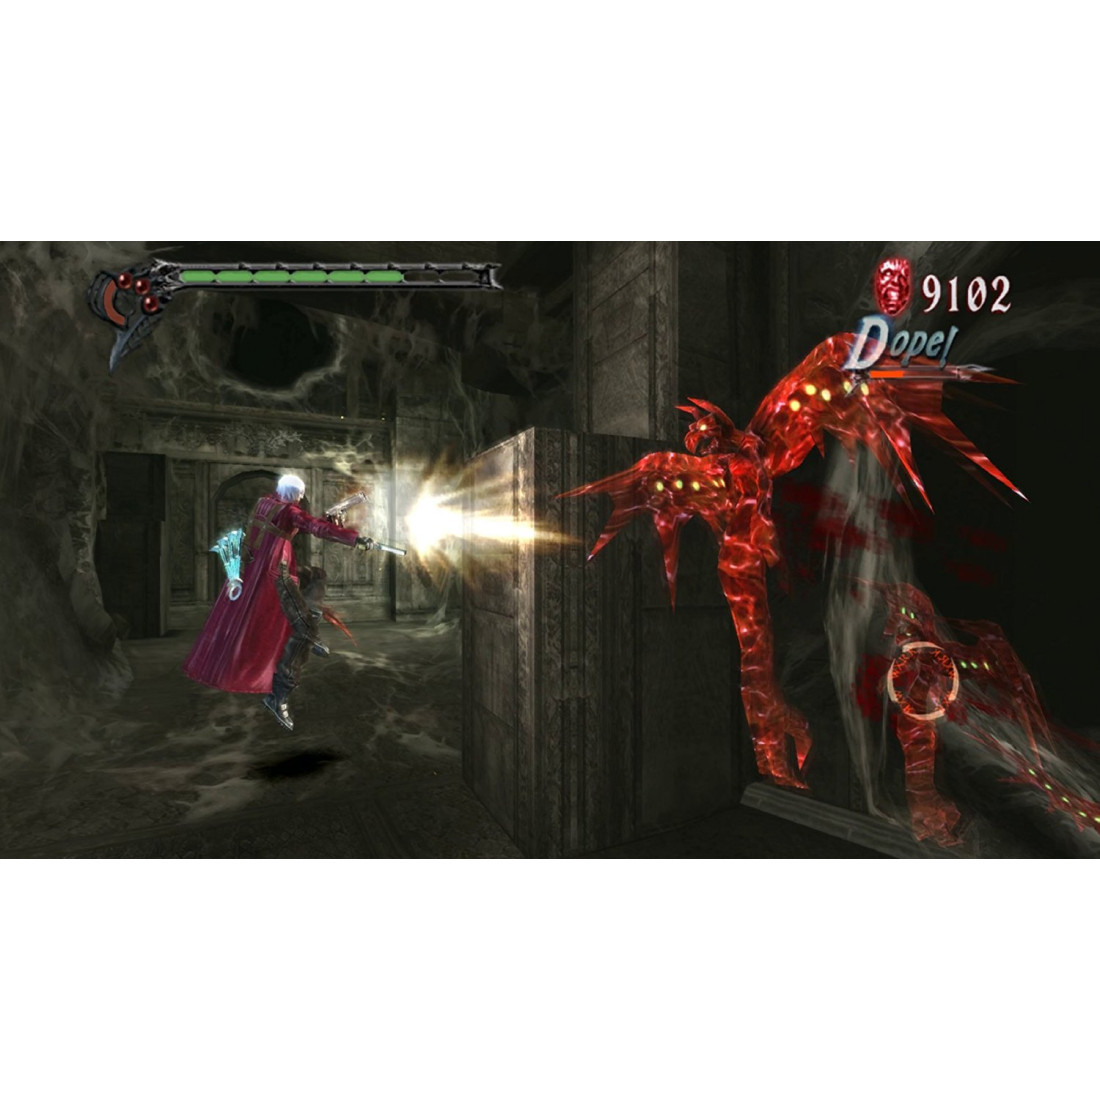 Devil May Cry 4 Nintendo Switch. Настольная игра Devil May Cry. Devil May Cry 3 Nintendo Switch. Devil may cry collection купить